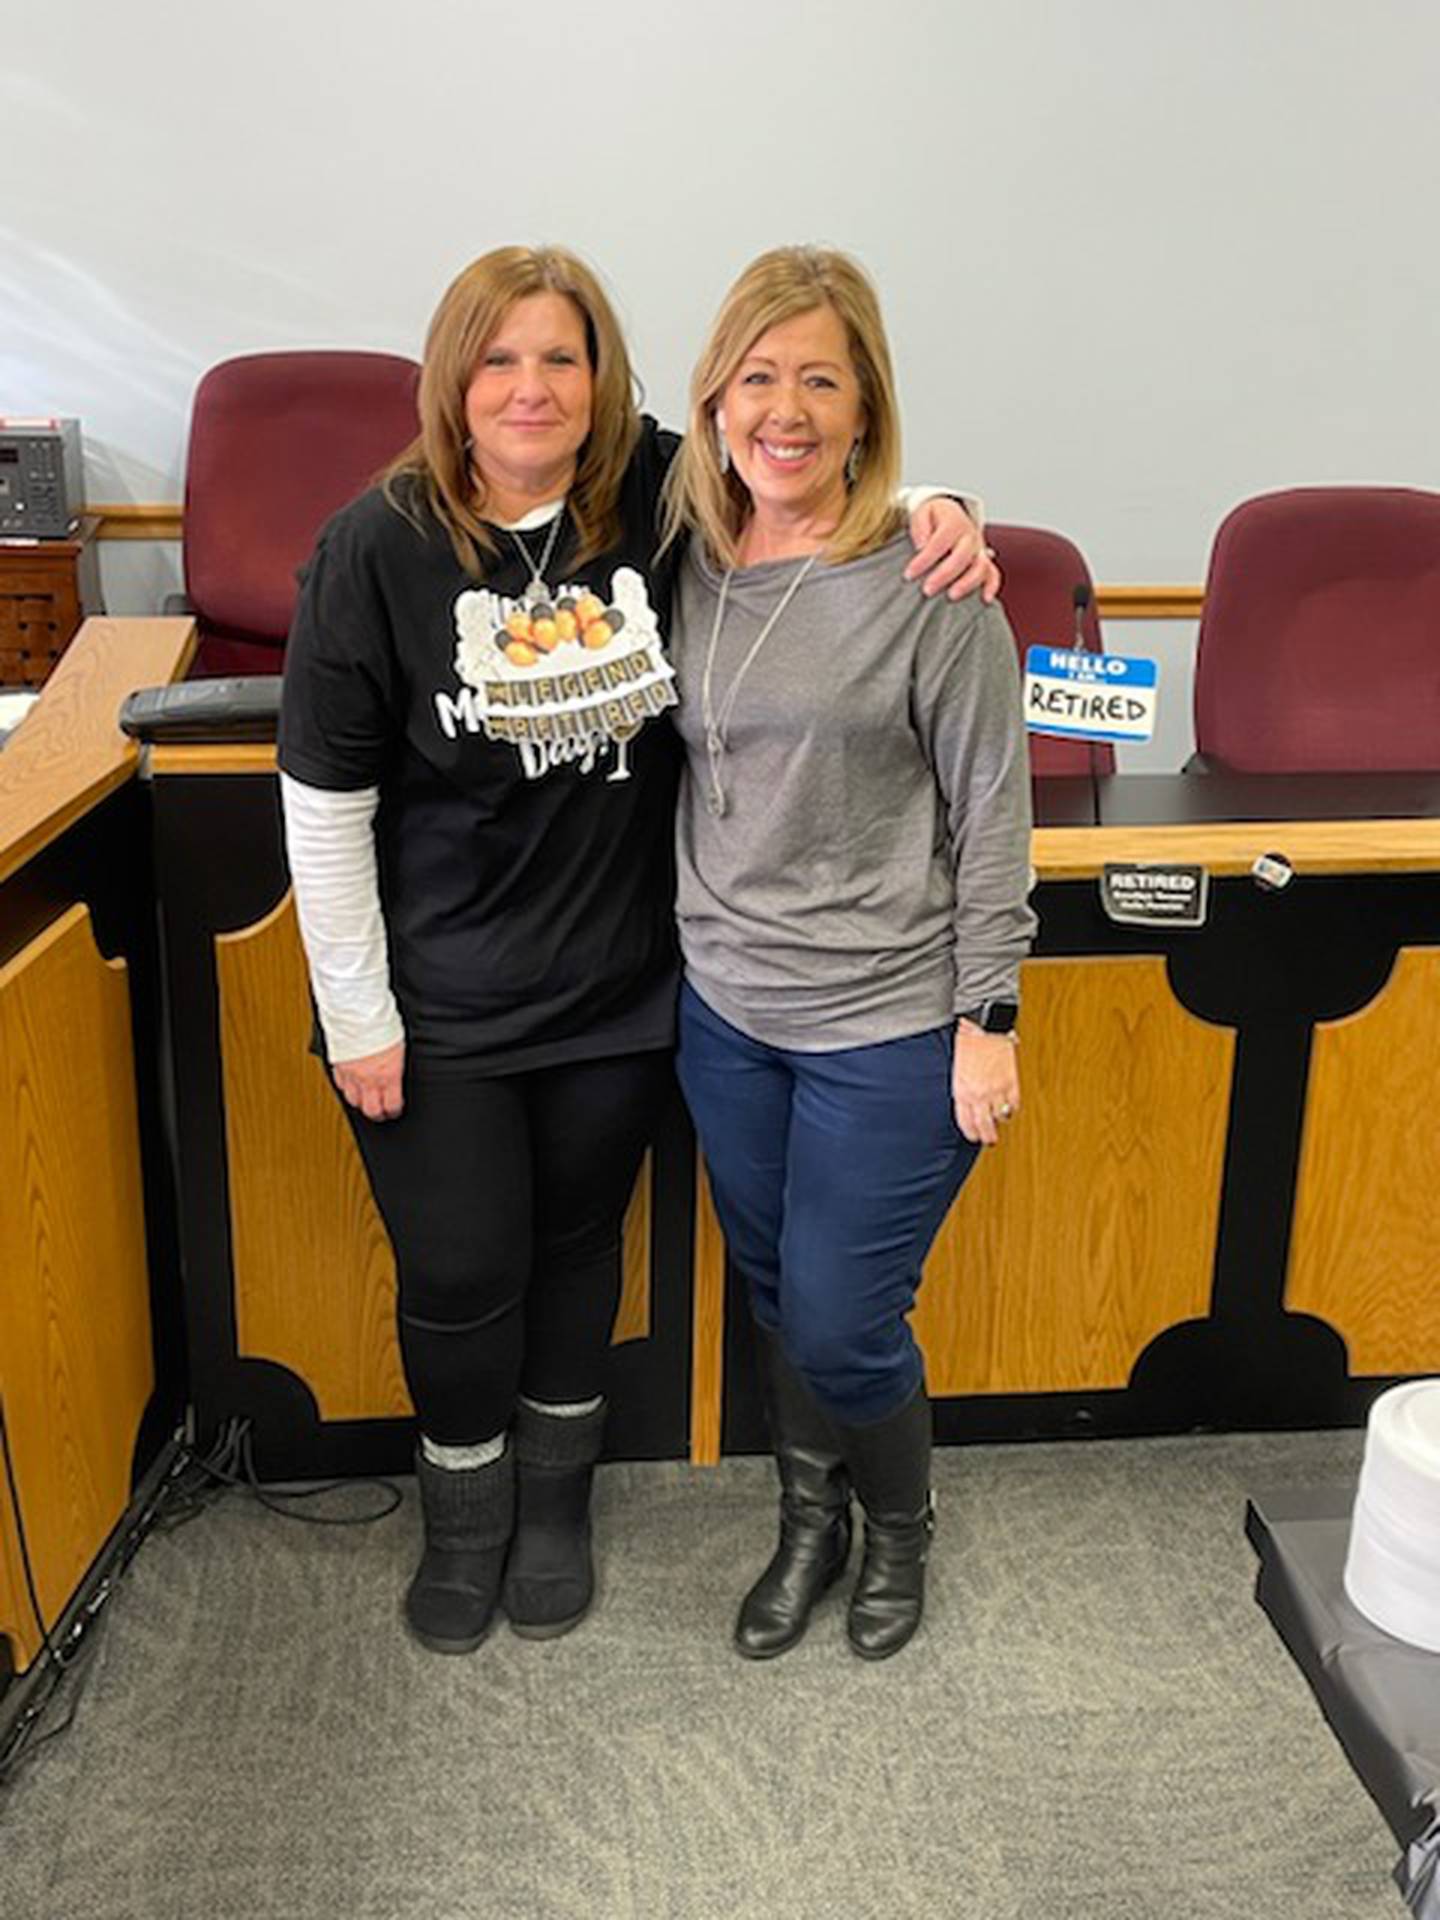 Janet Serdar of Crest Hill (in the "my retirement day" shirt) poses with retired city clerk Vicki Hackney at the city of Crest Hill on Friday, January 7, 2022 to celebrate Serdar's retirement. Serdar had worked for the city of Crest Hill for 35 years.